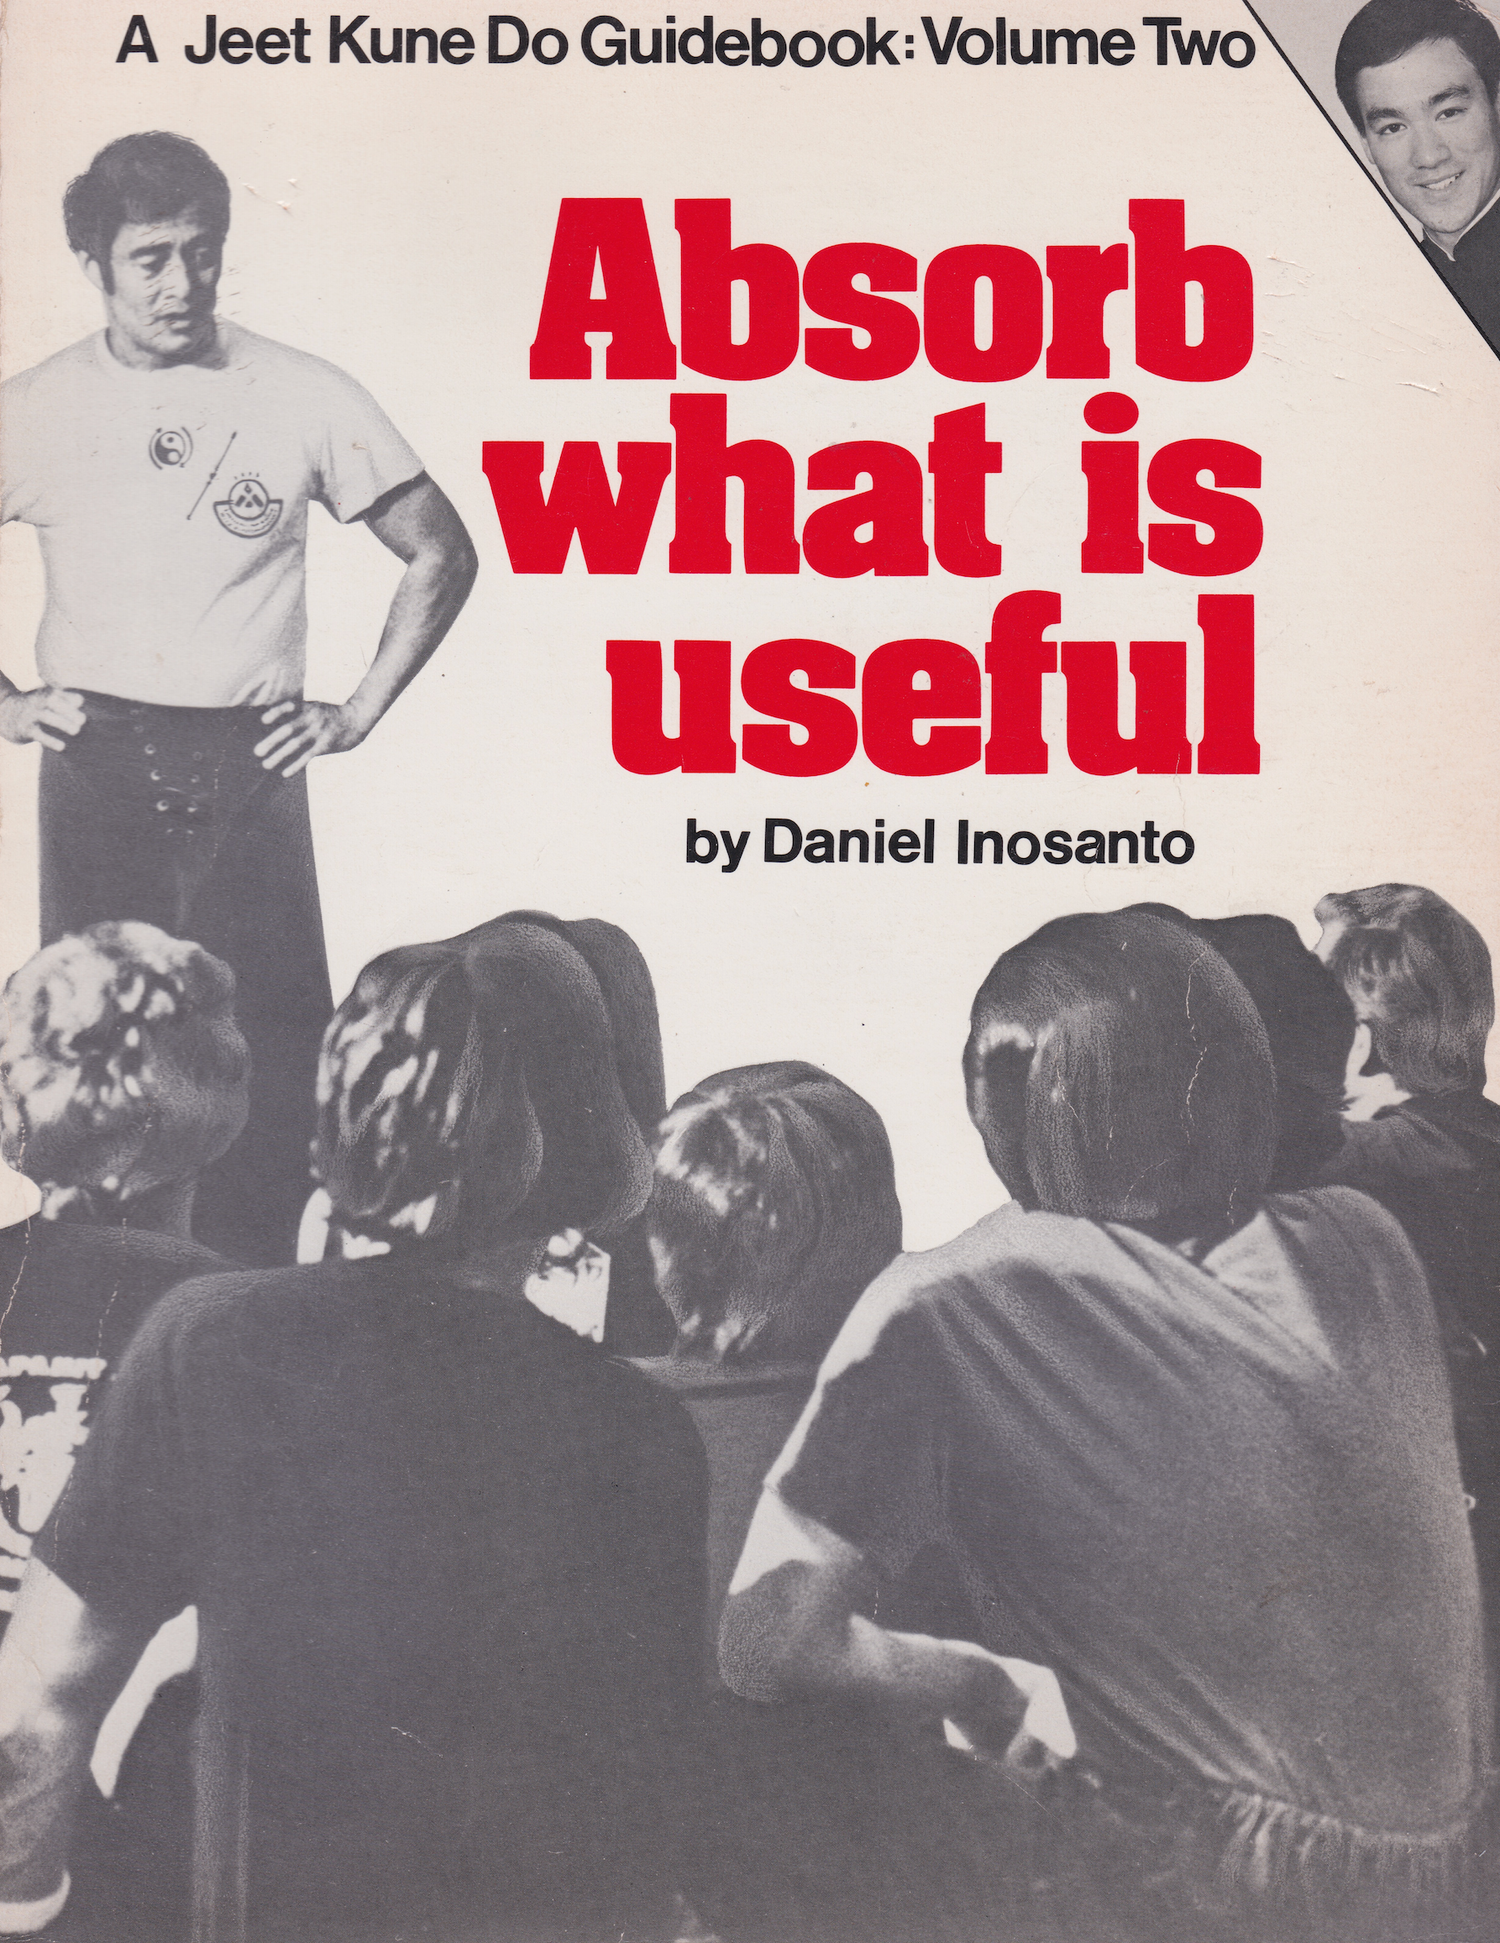 Jeet Kune Do Guidebook 2: Absorb What is Useful Book by Dan Inosanto (Preowned)